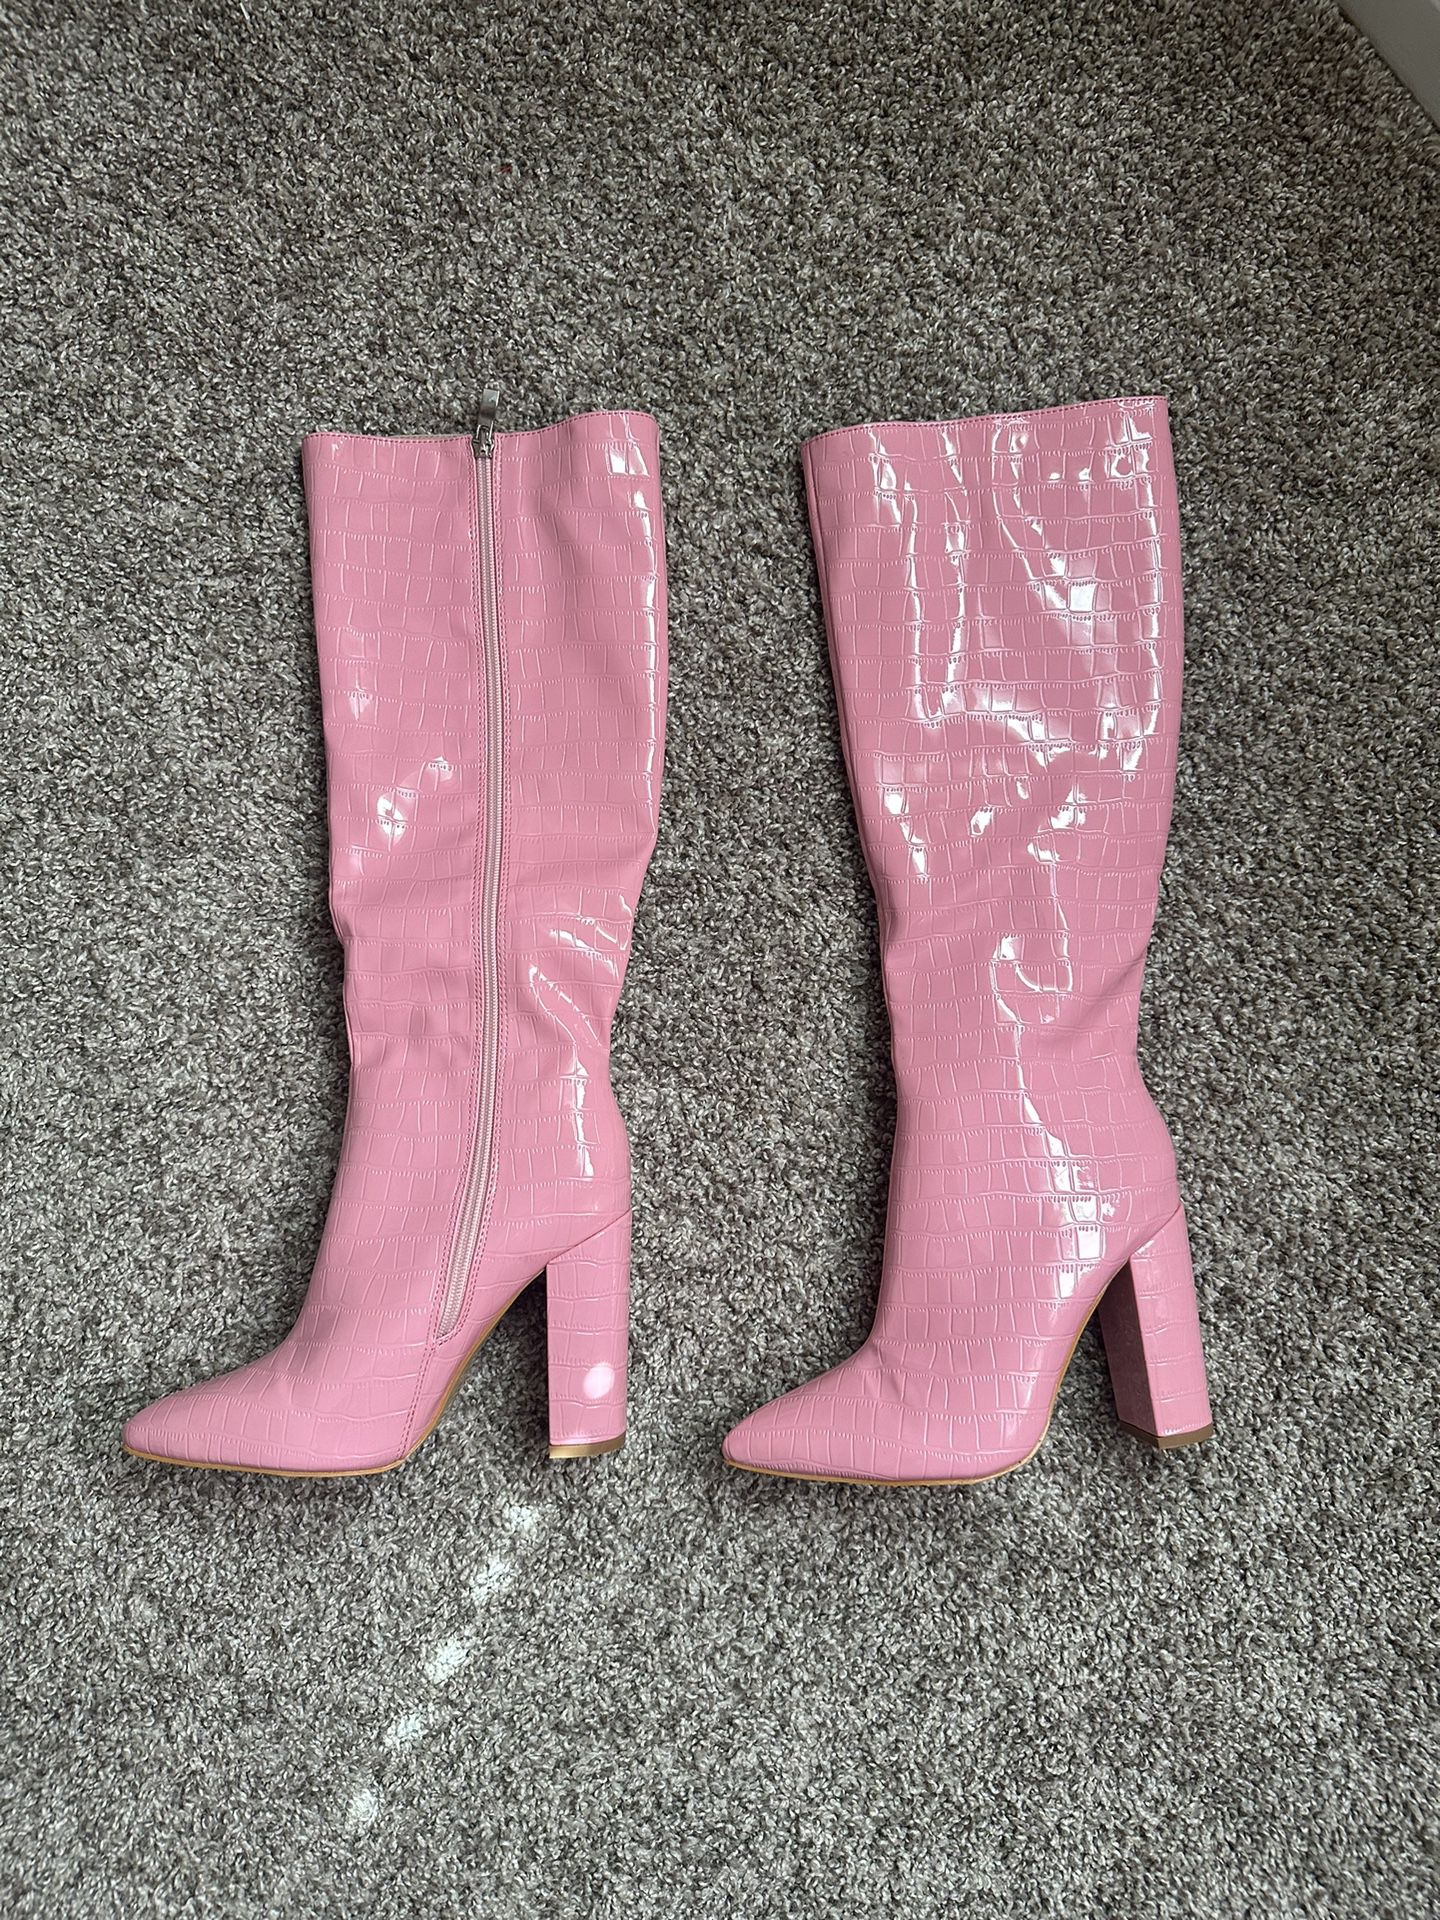 Pink Boots Size 6 